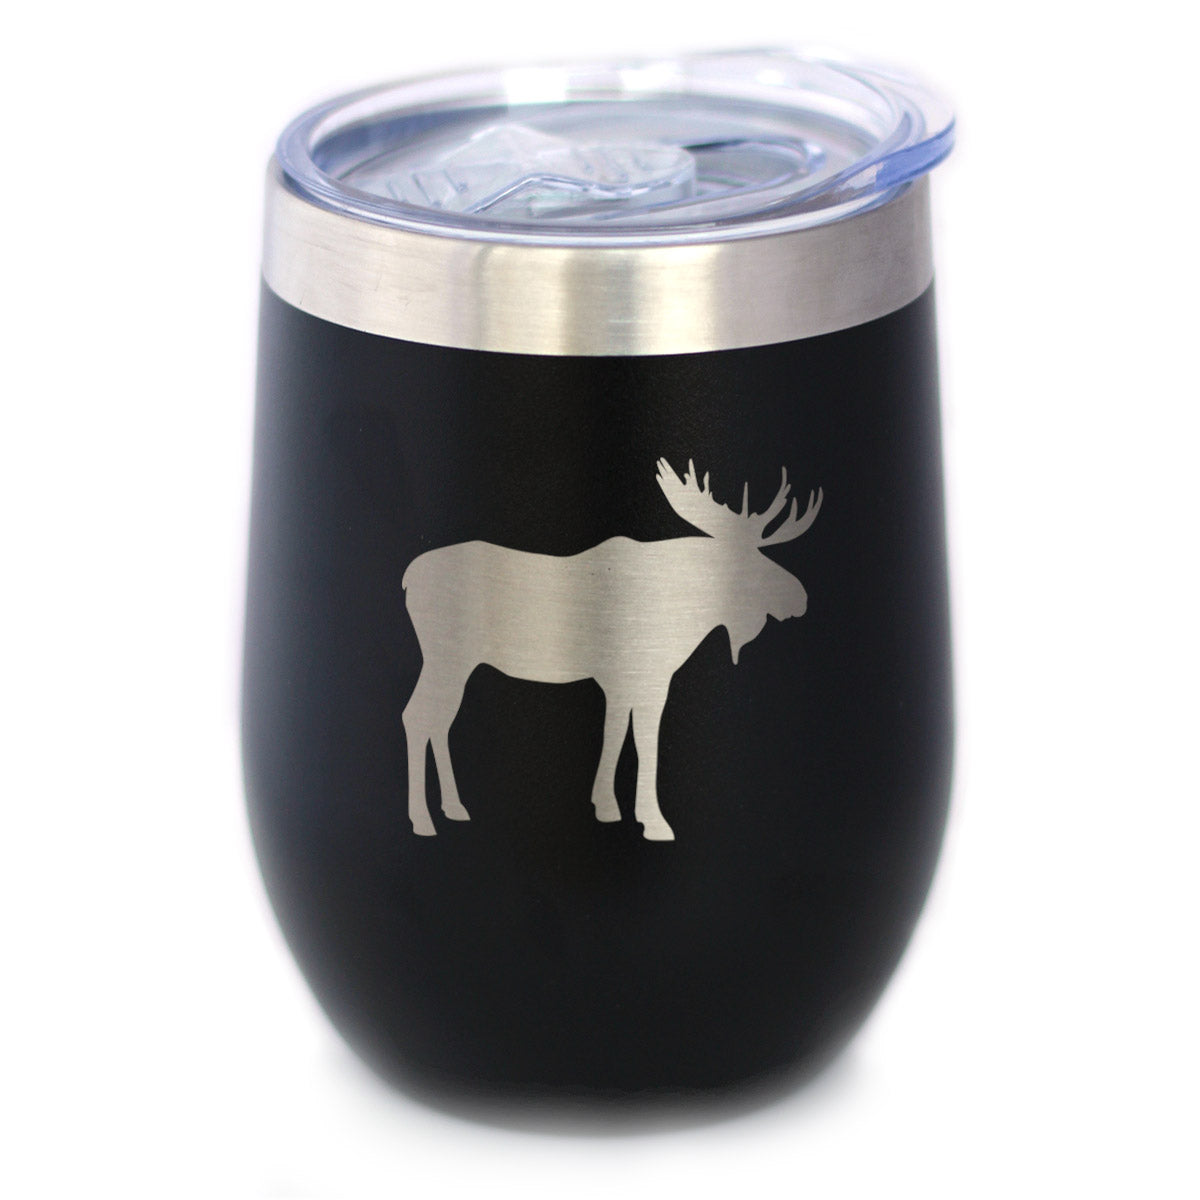 Moose Wine Tumbler with Sliding Lid - Stemless Stainless Steel Insulated Cup - Cute Outdoor Camping Mug